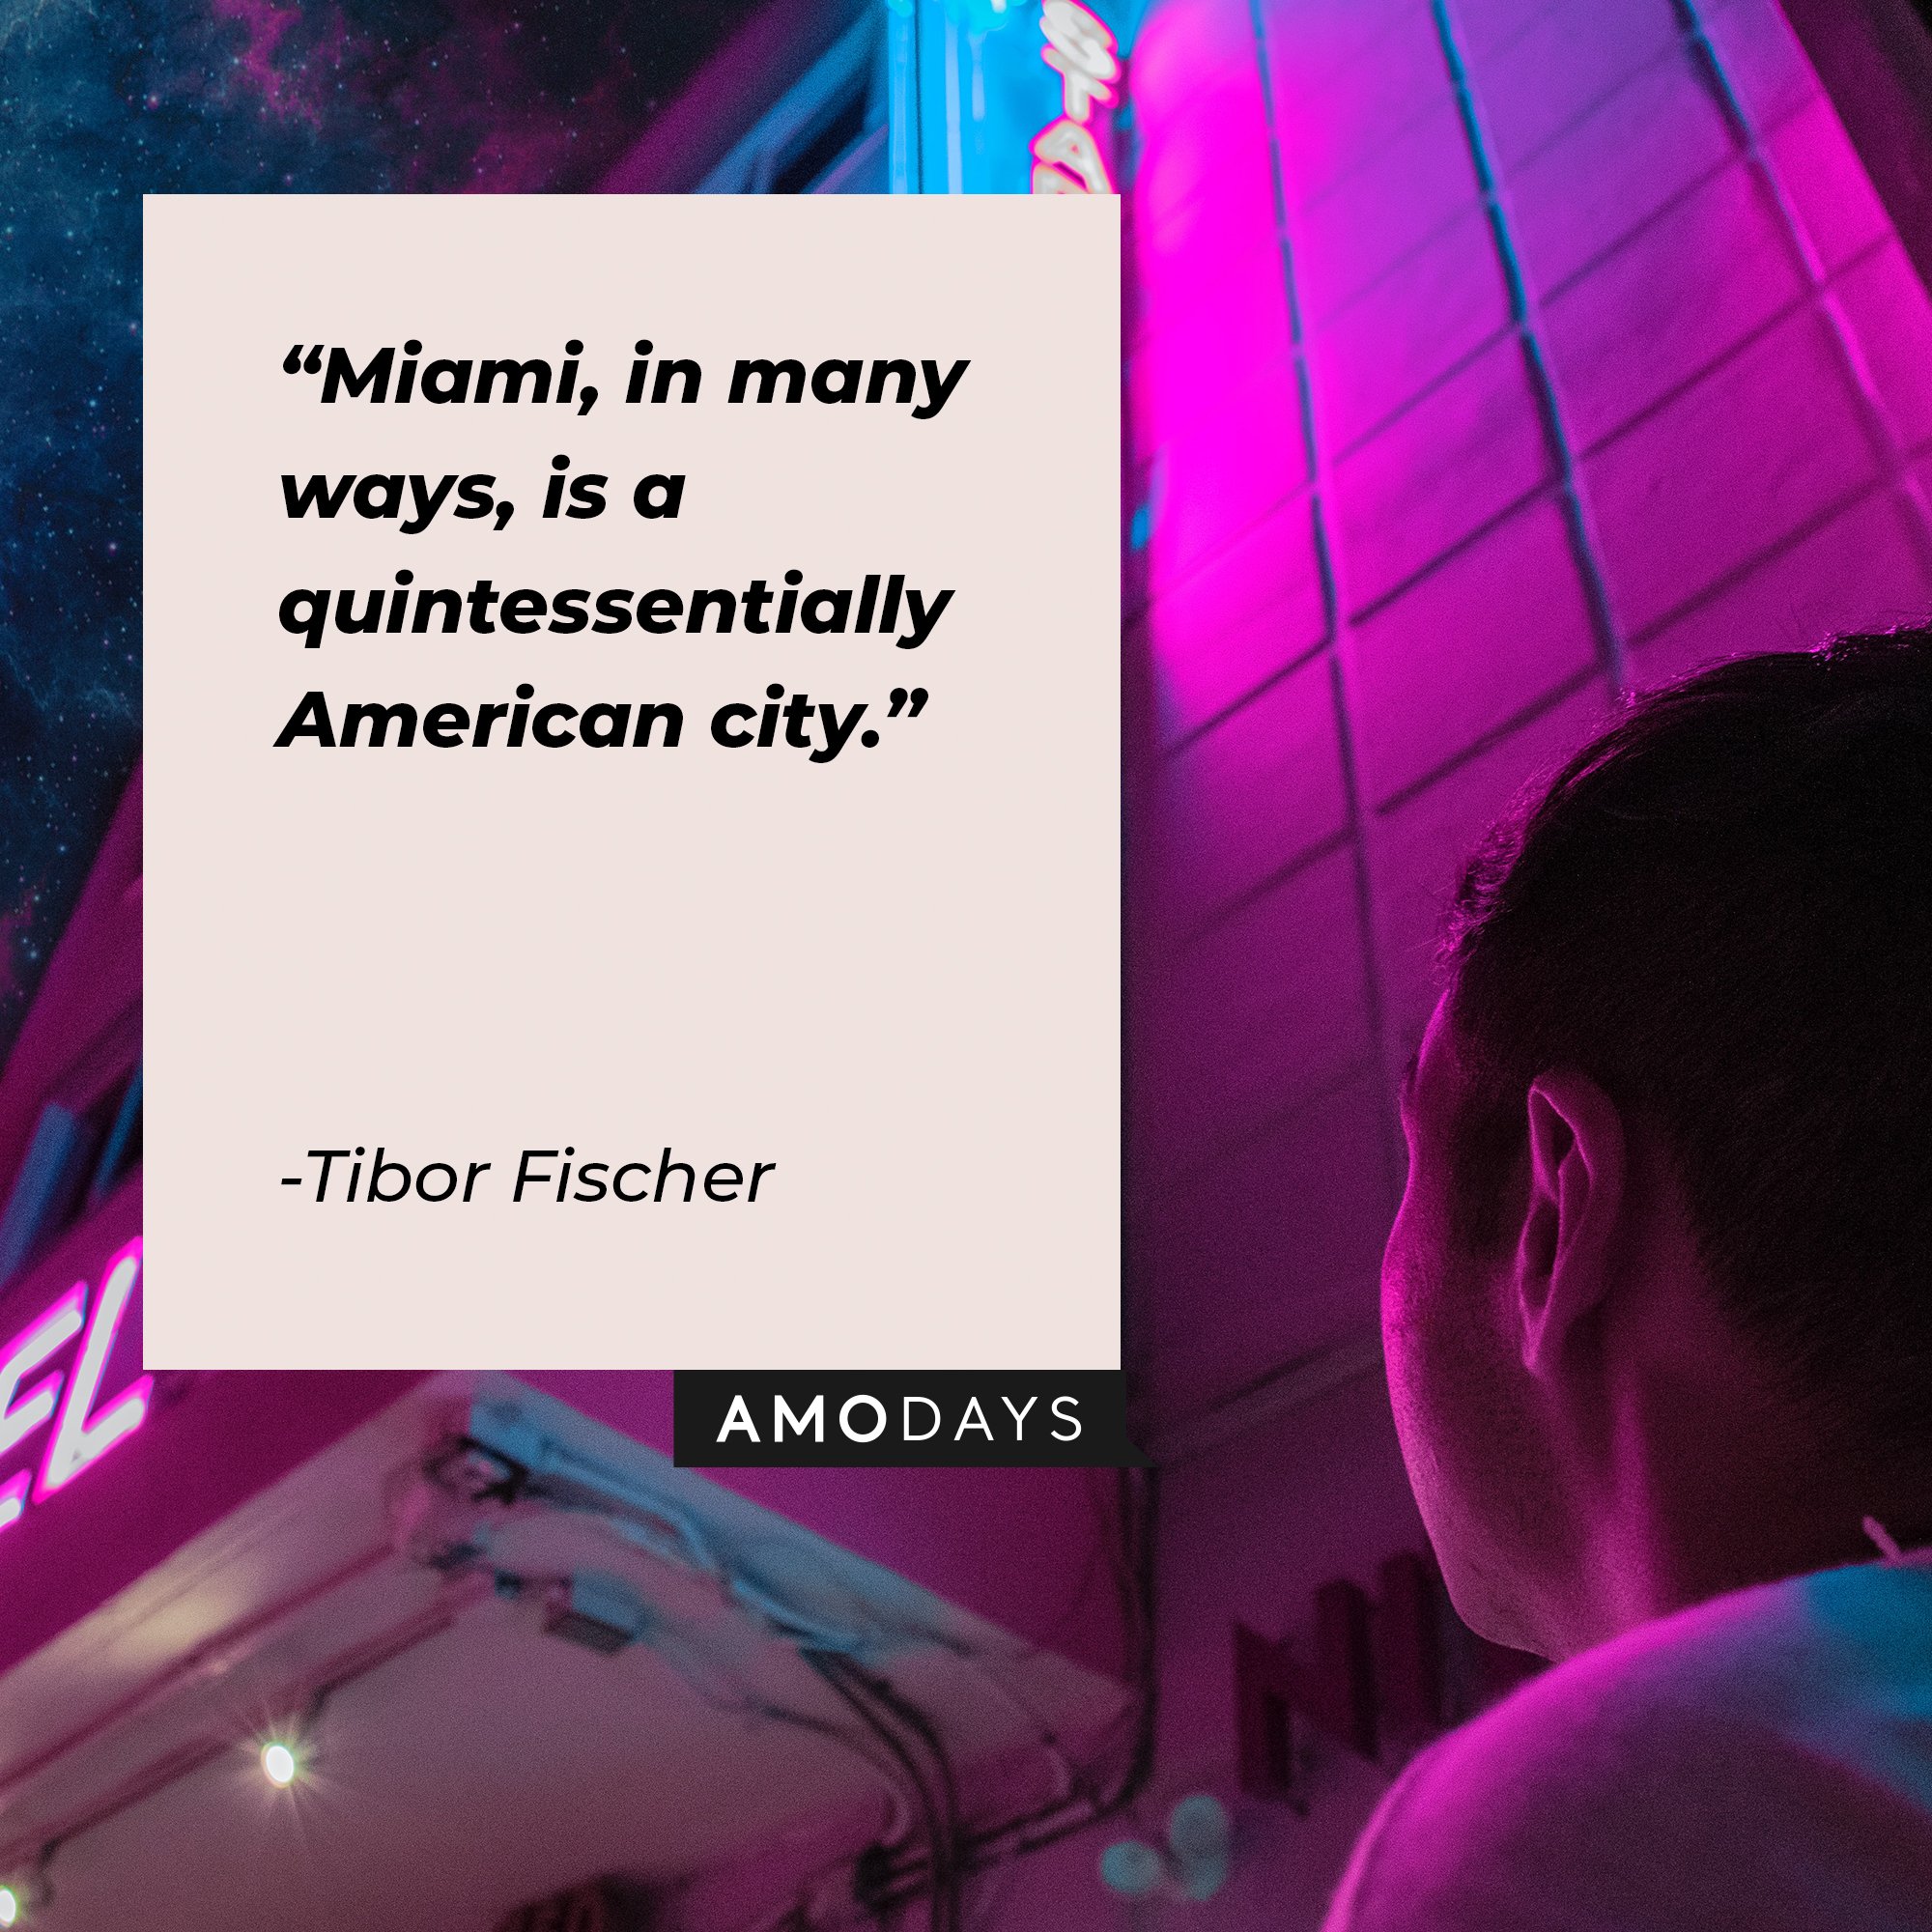  Tibor Fischer’s quote: "Miami, in many ways, is a quintessentially American city.” | Image: AmoDays